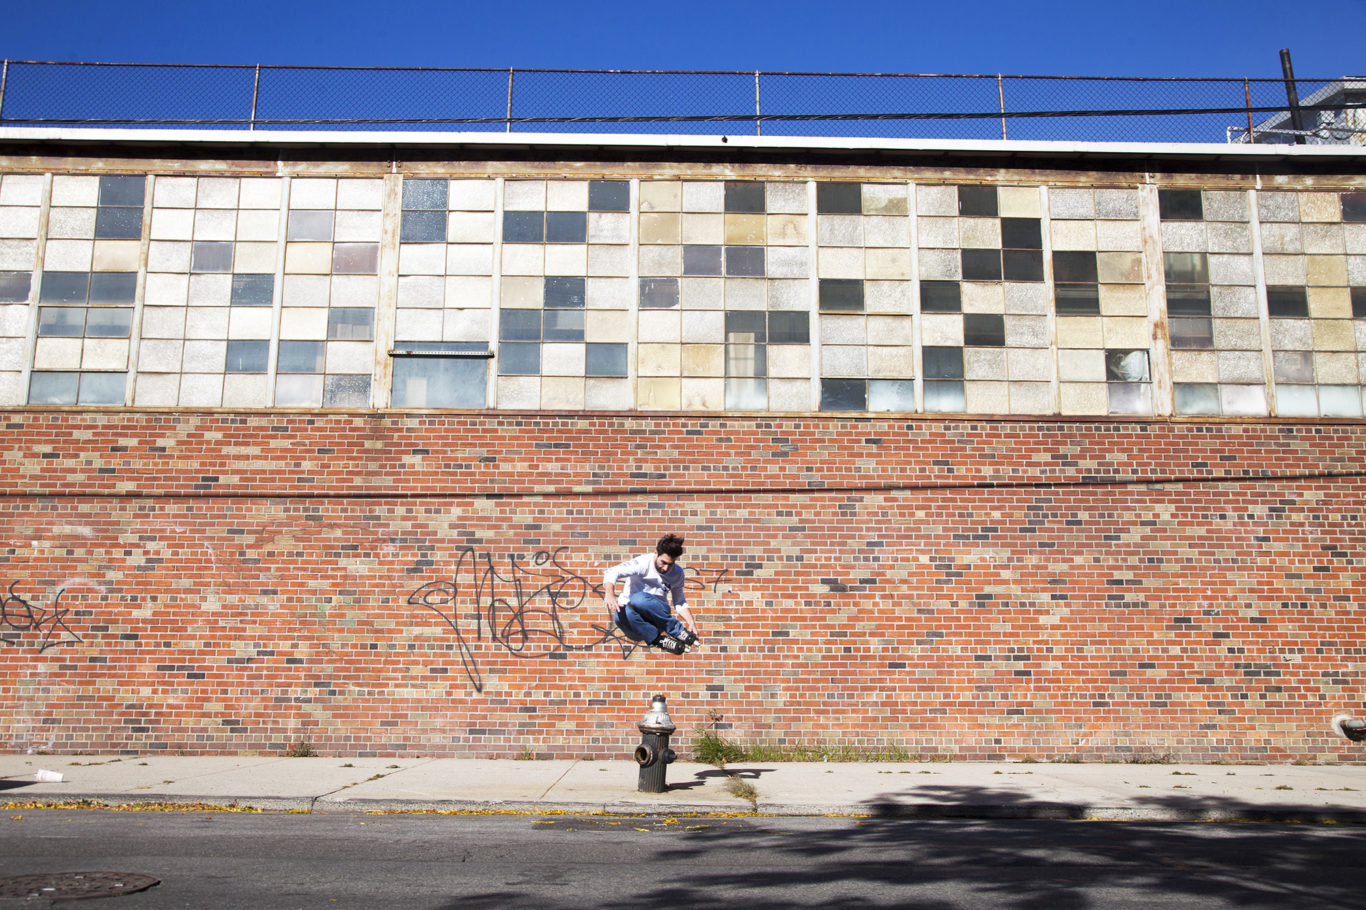 180 THE HYDRANT - SUNNYSIDE QUEENS, NY - PHOTOGRAPH BY RYAN LOEWY FOR BE-MAG